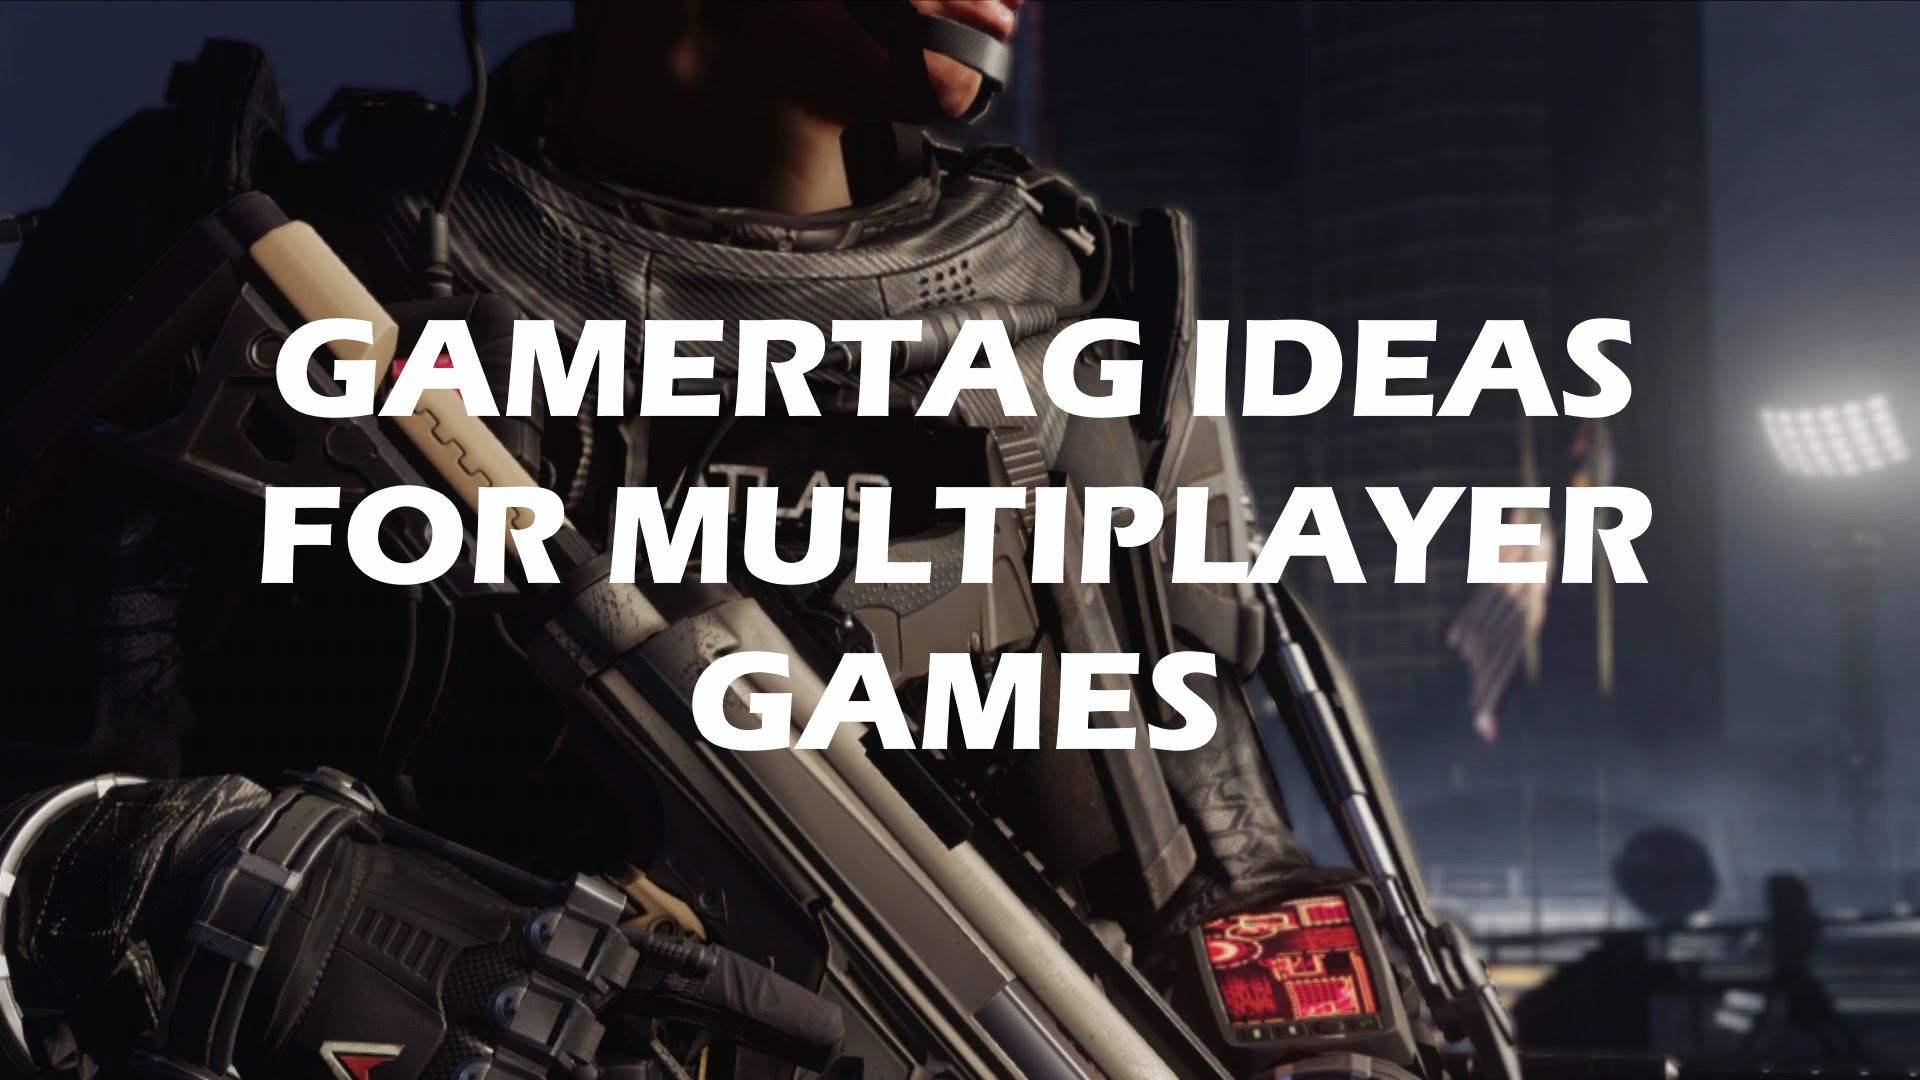 If you are looking for some gamertag ideas for multiplayer games